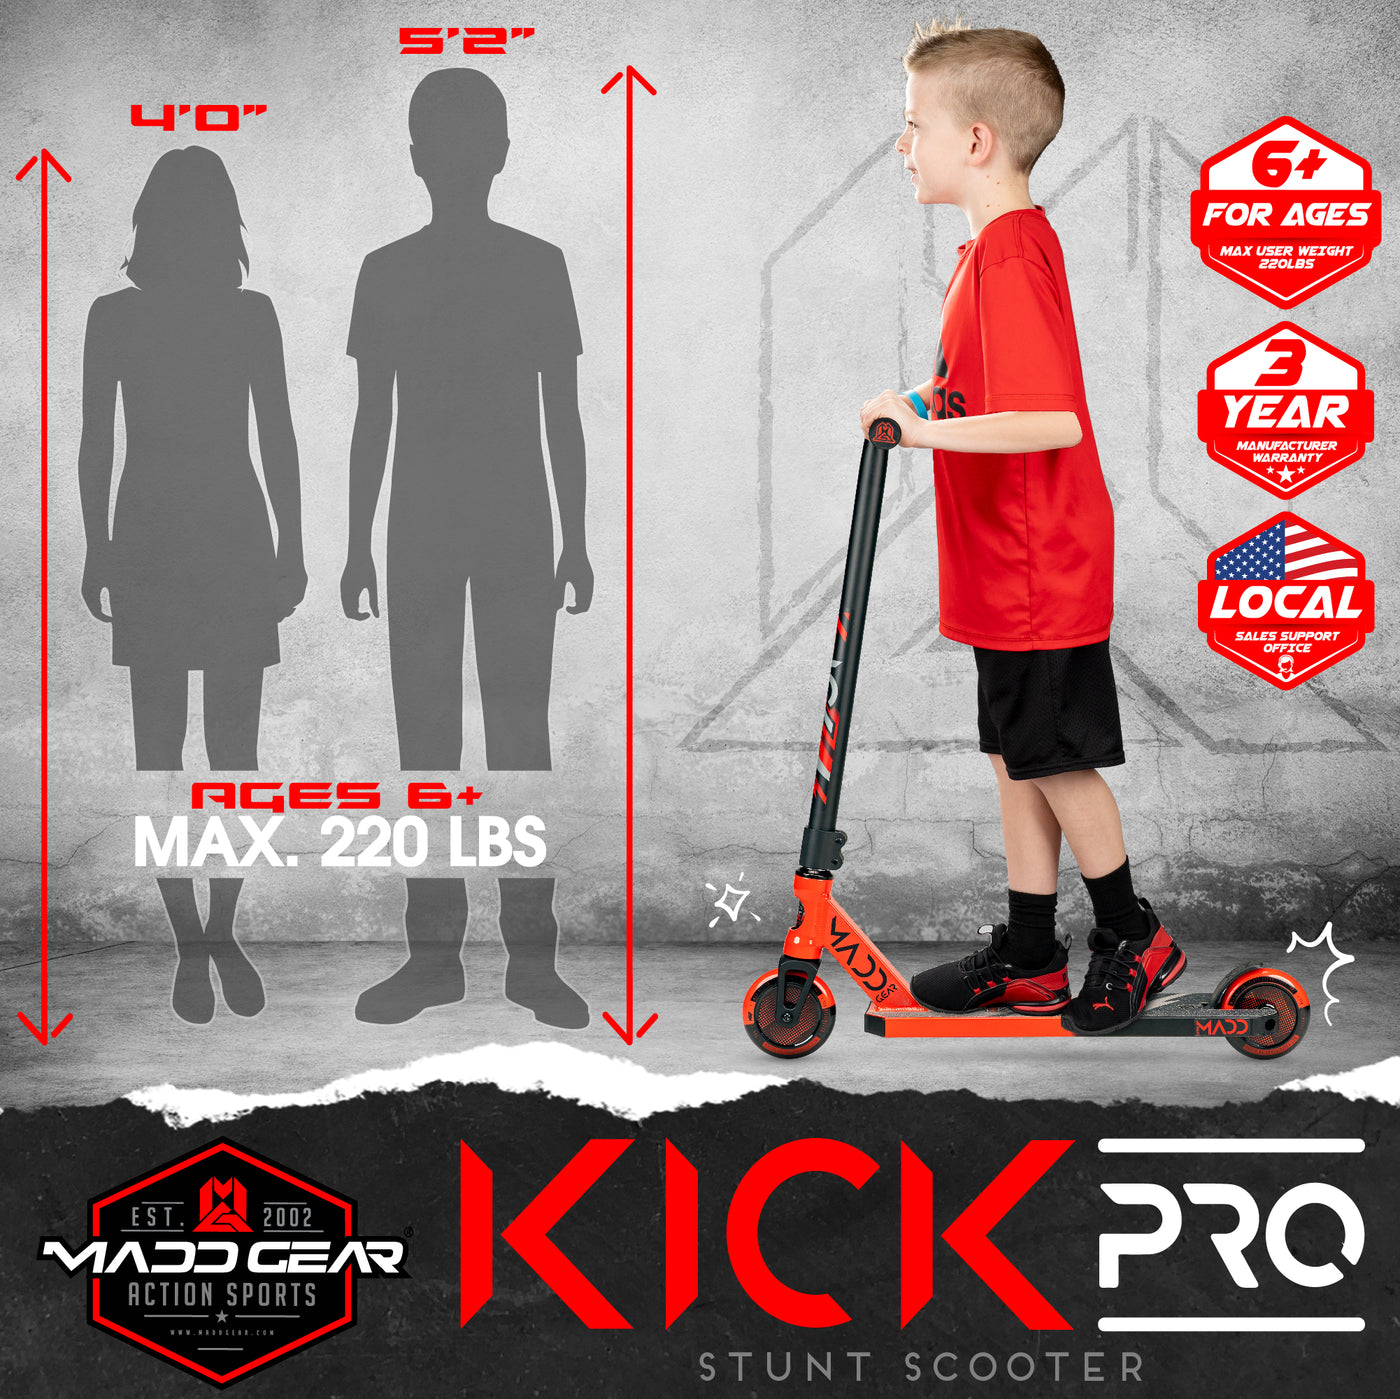 Smooth-Riding Madd Gear MGP Kick Stunt Pro Scooter Complete High Quality Razor Trick Skate Park Mad Red Black Kids